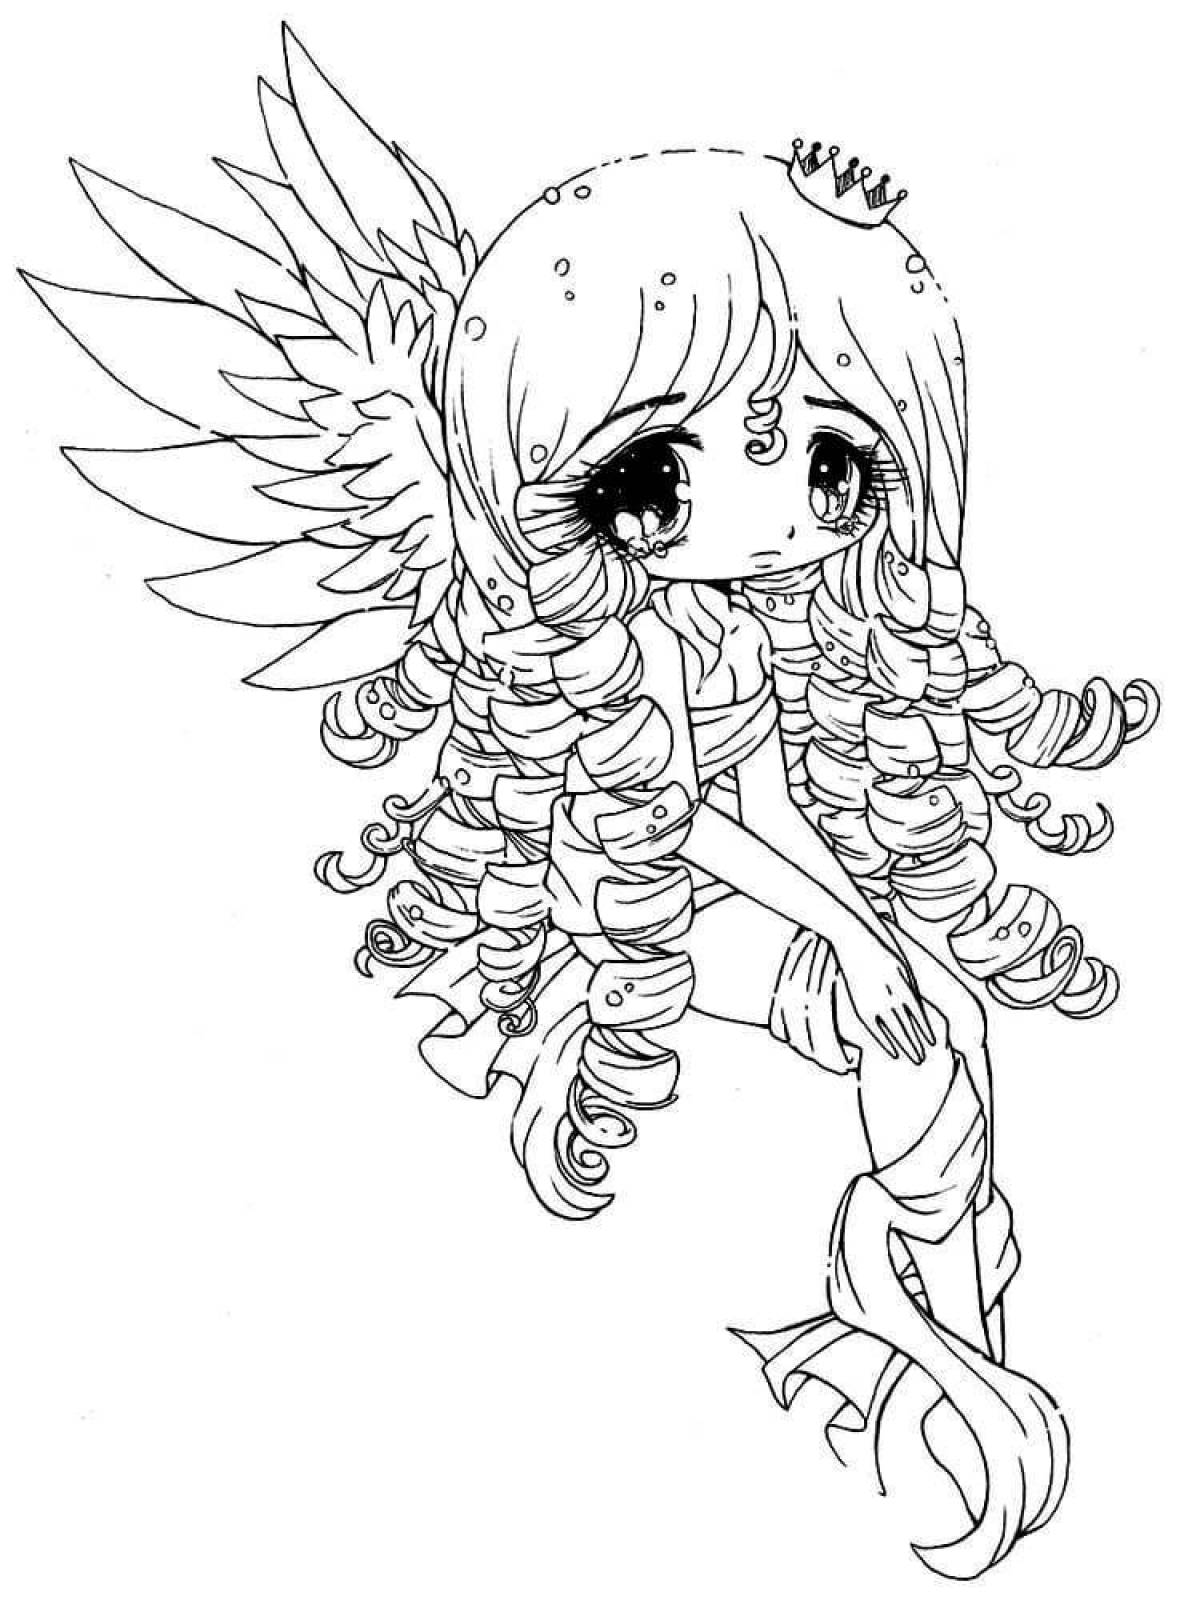 Fairy chibi coloring page